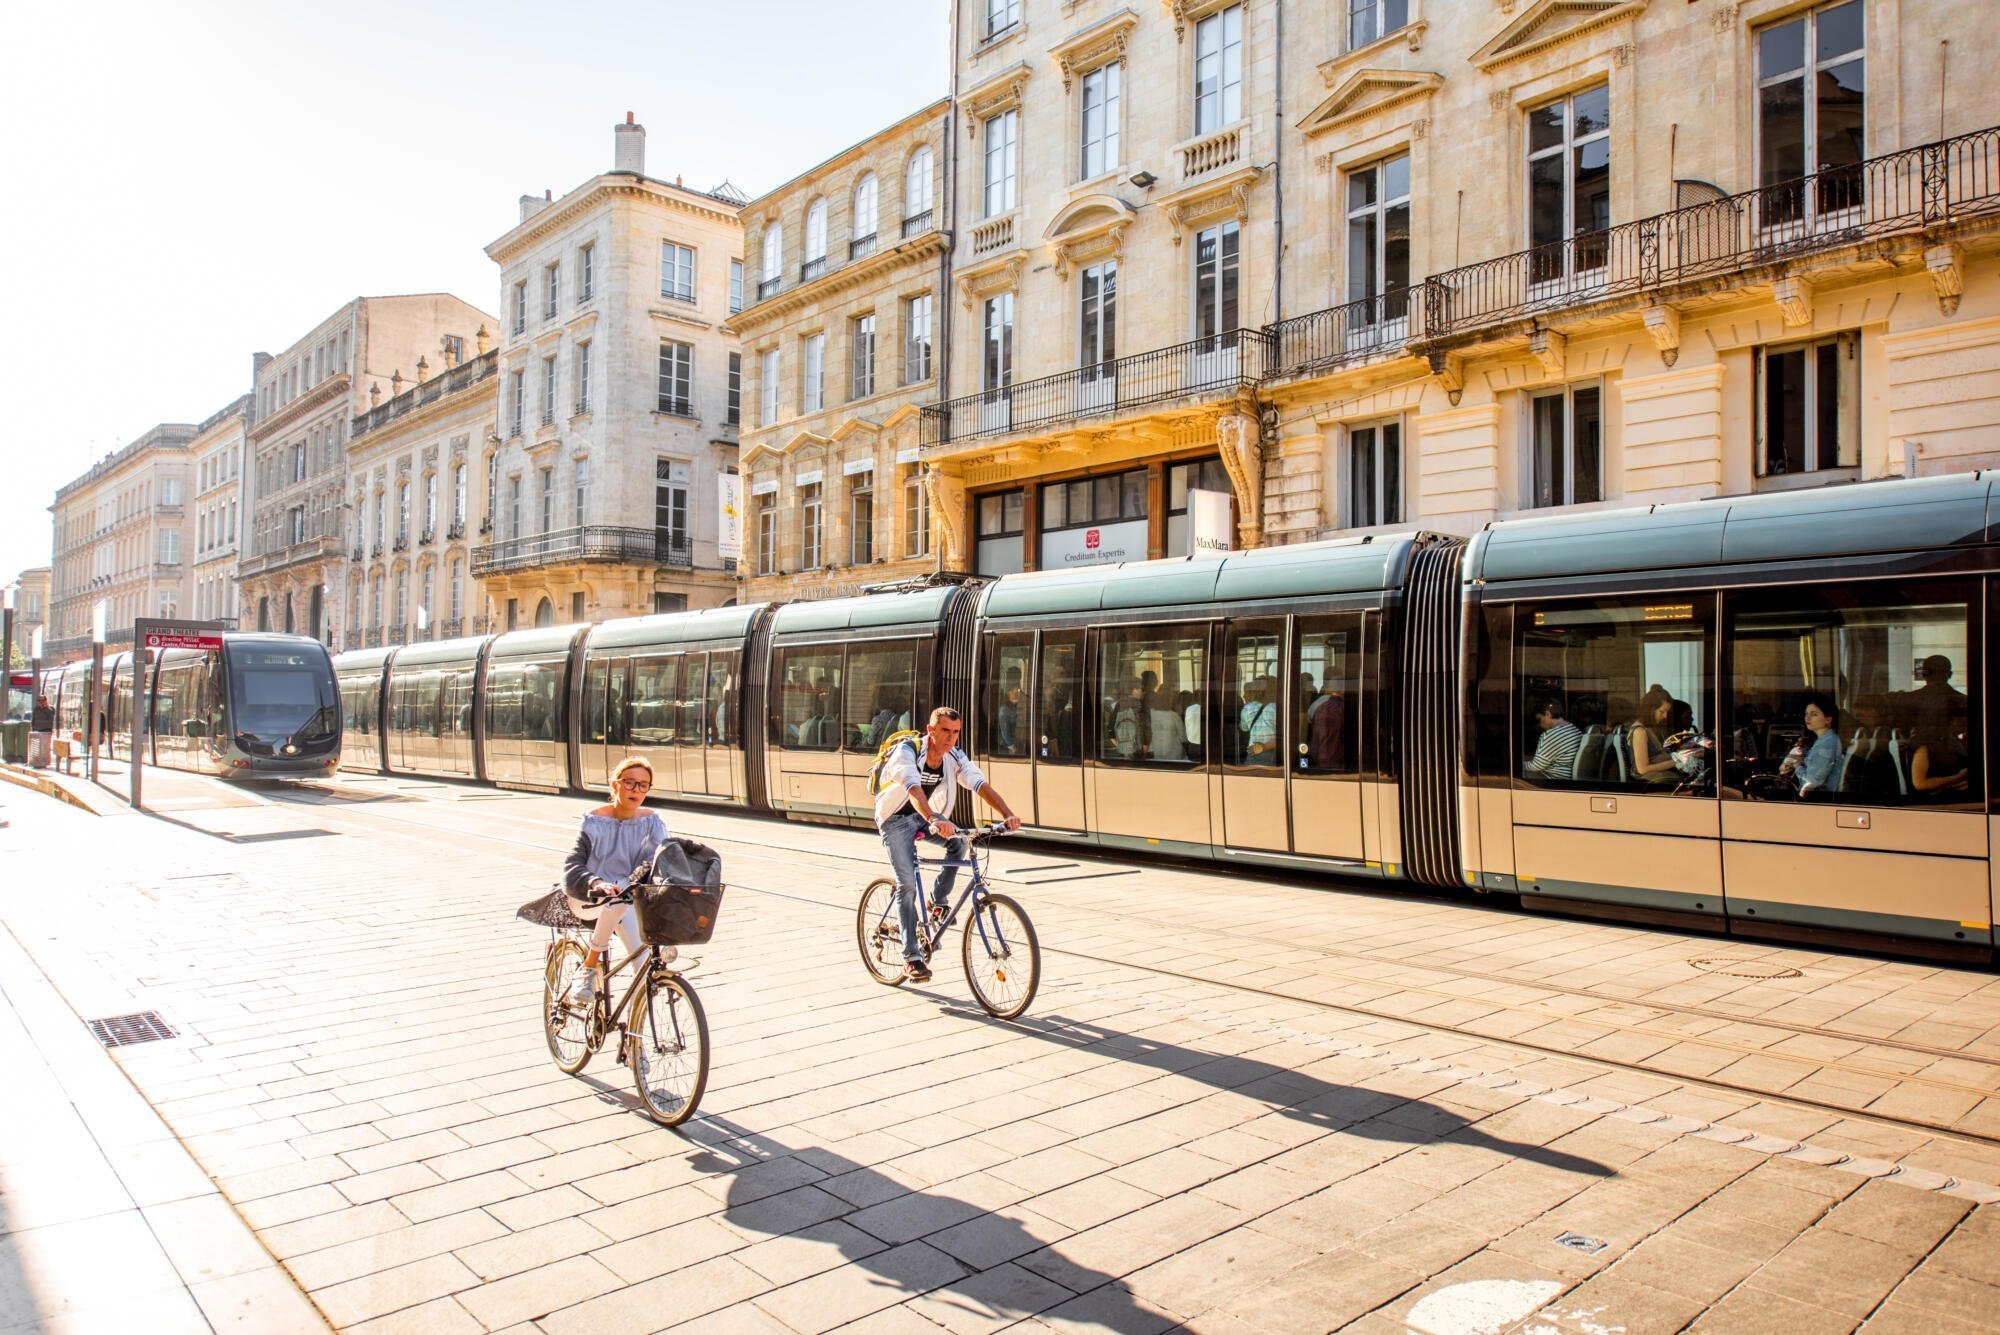 Joint statement: Europe must come together to change urban mobility